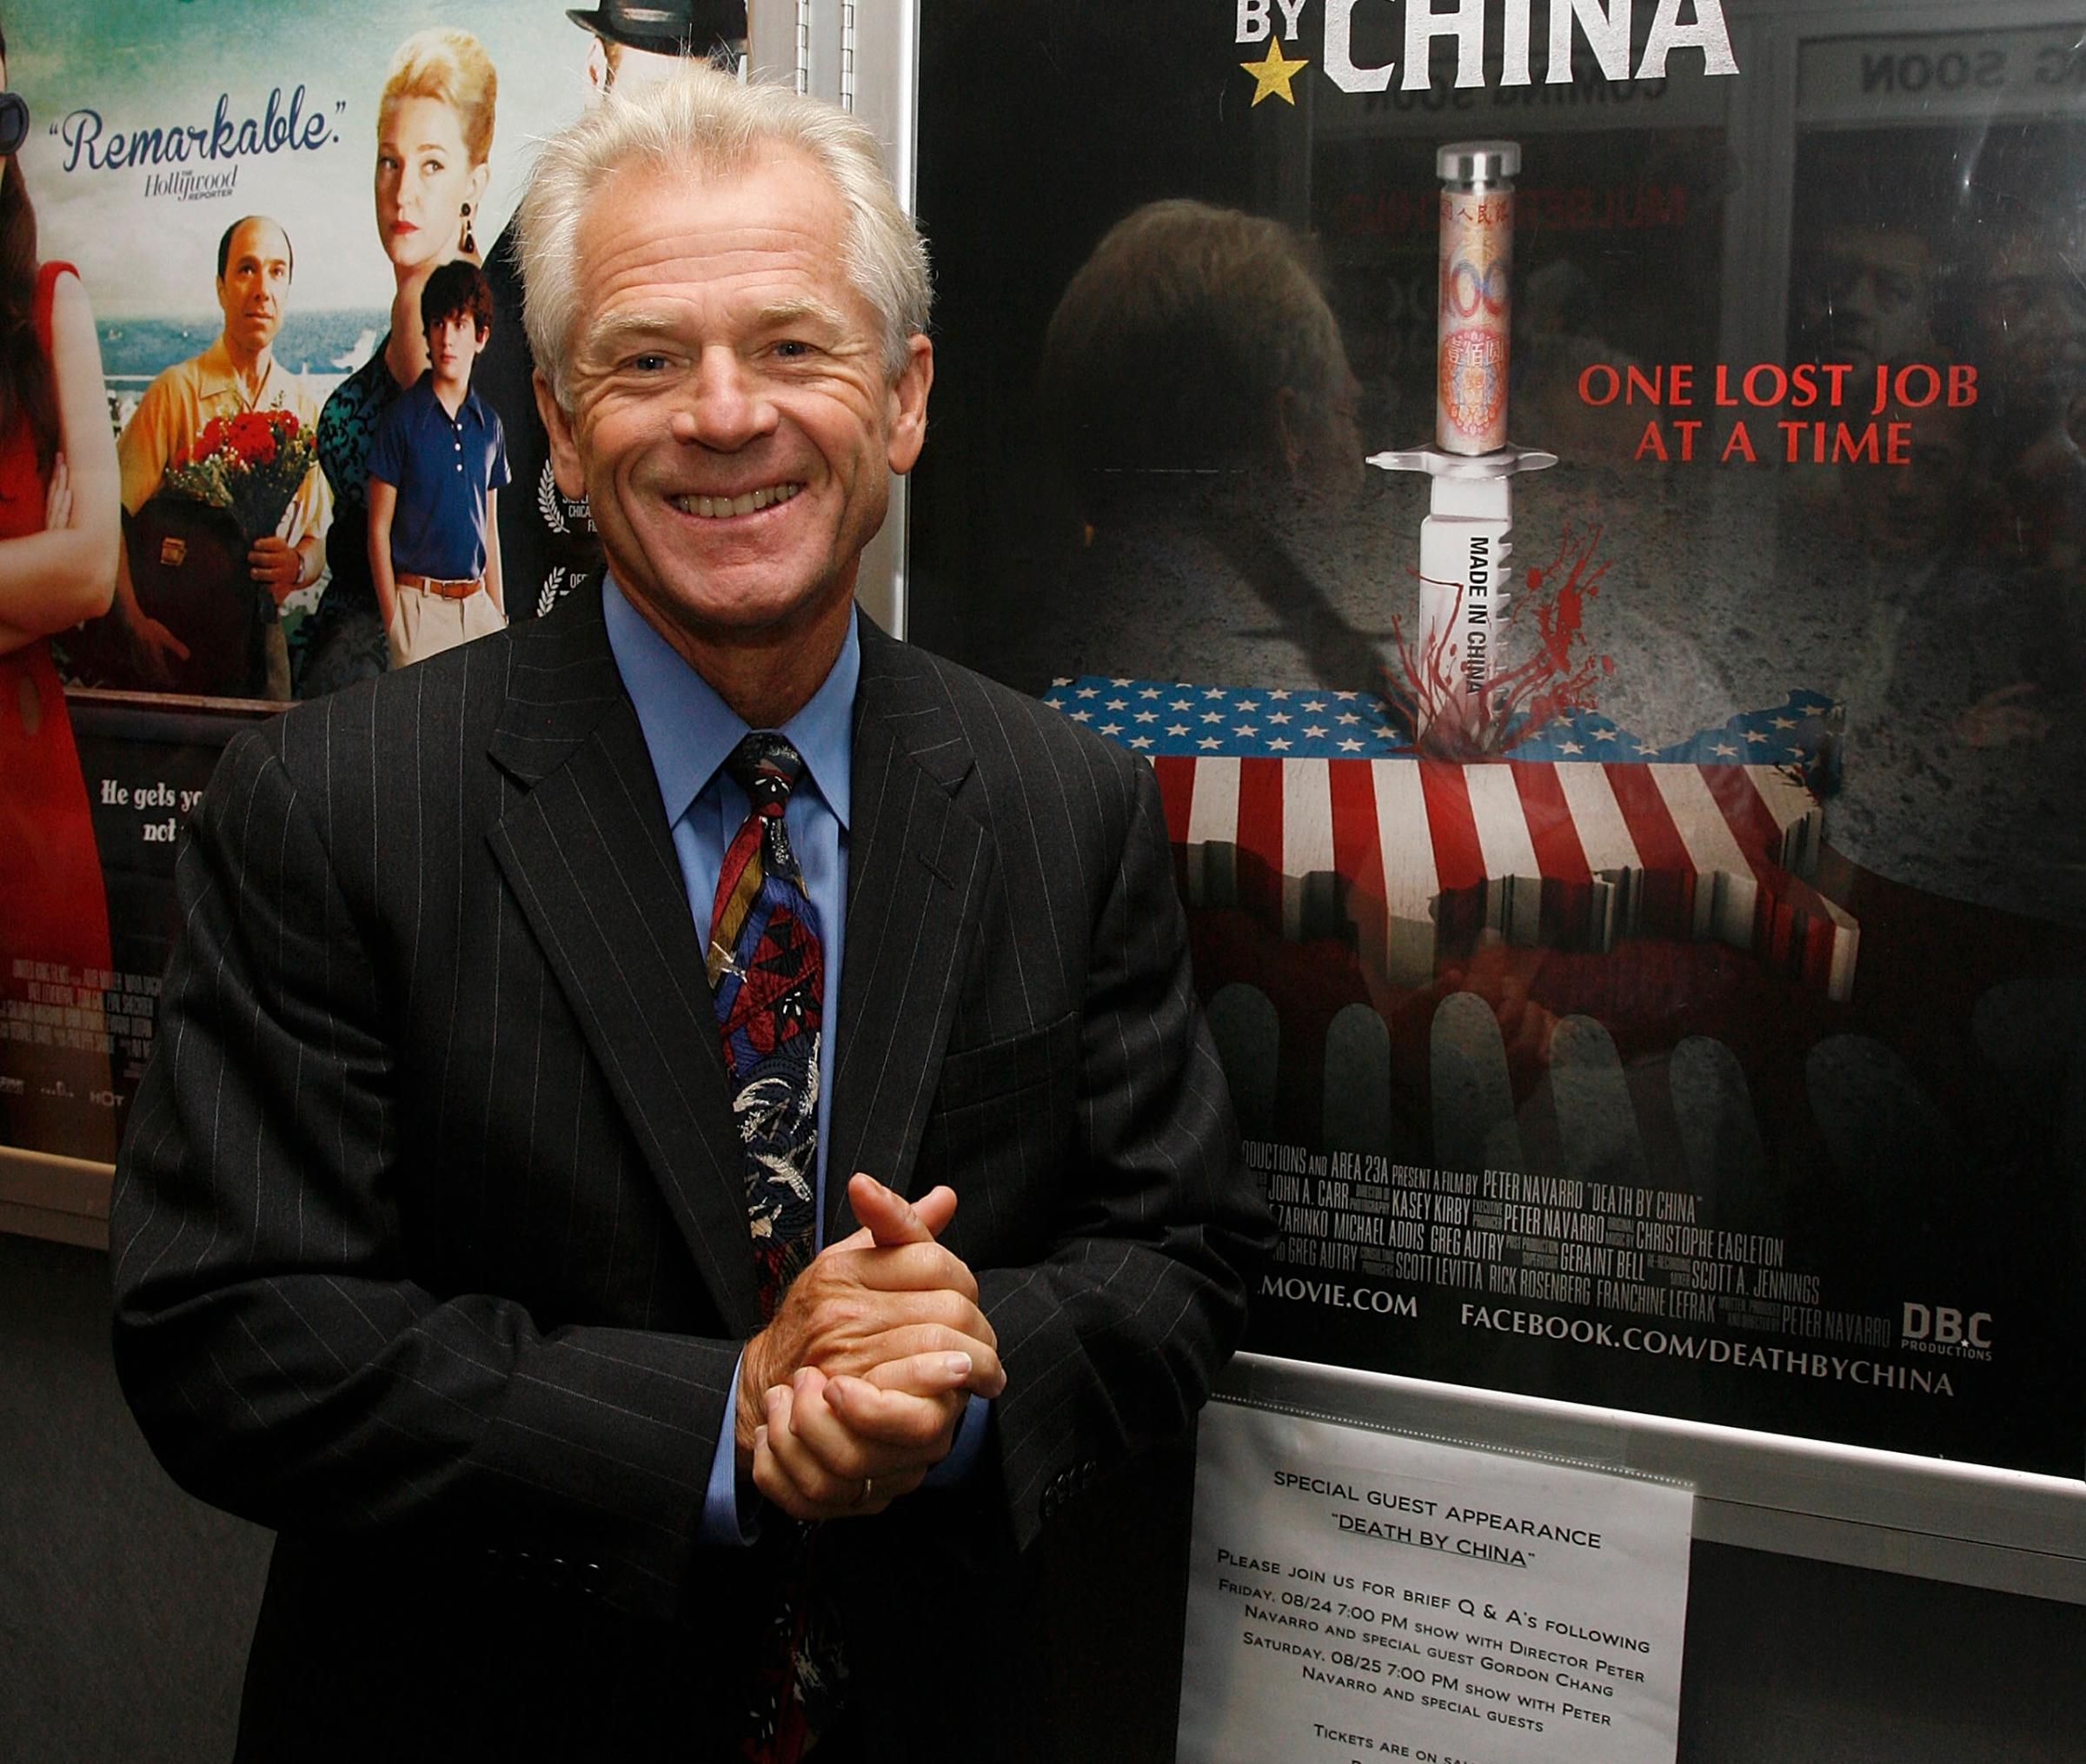 Director Peter Navarro attends the "Death By China" screening at the Quad Cinema in New York City on Aug. 24, 2012.